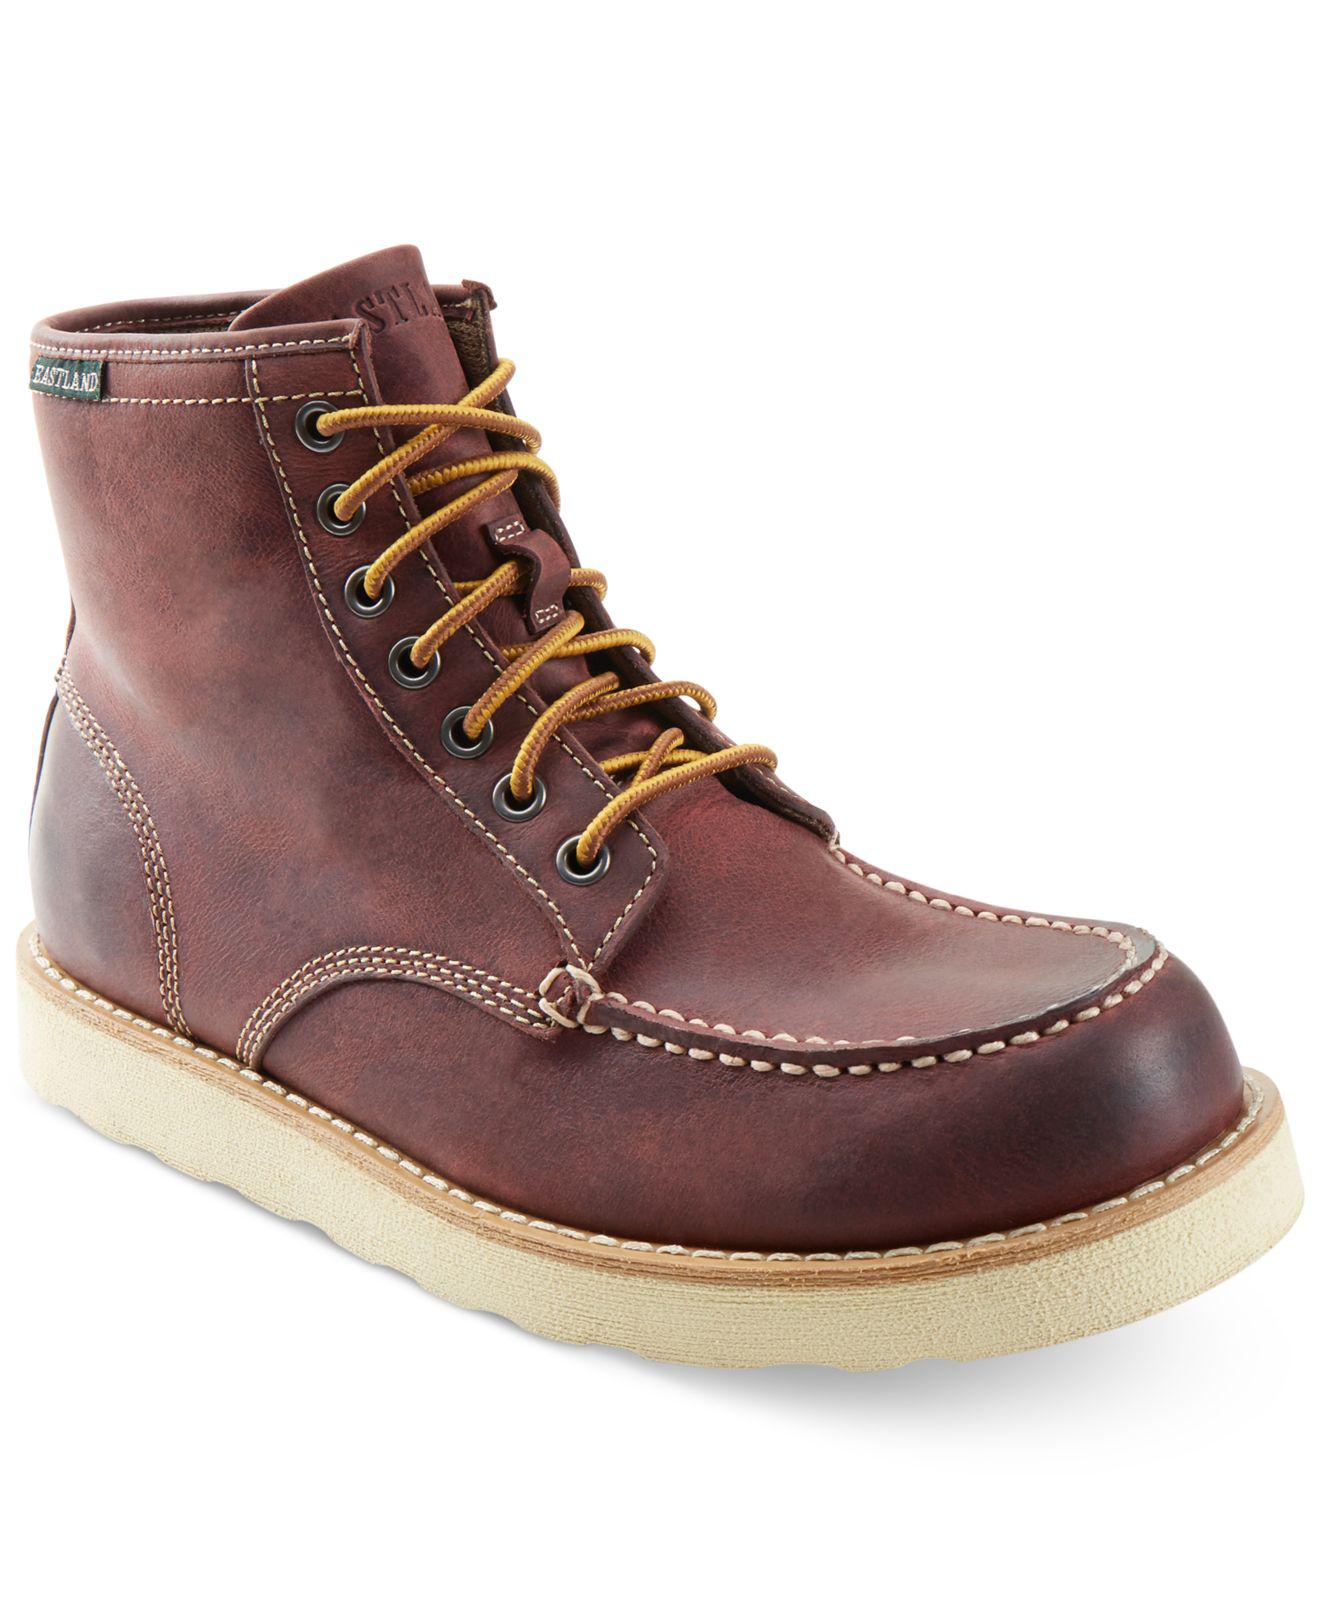 Lyst - Eastland Lumber Up Boots in Brown for Men